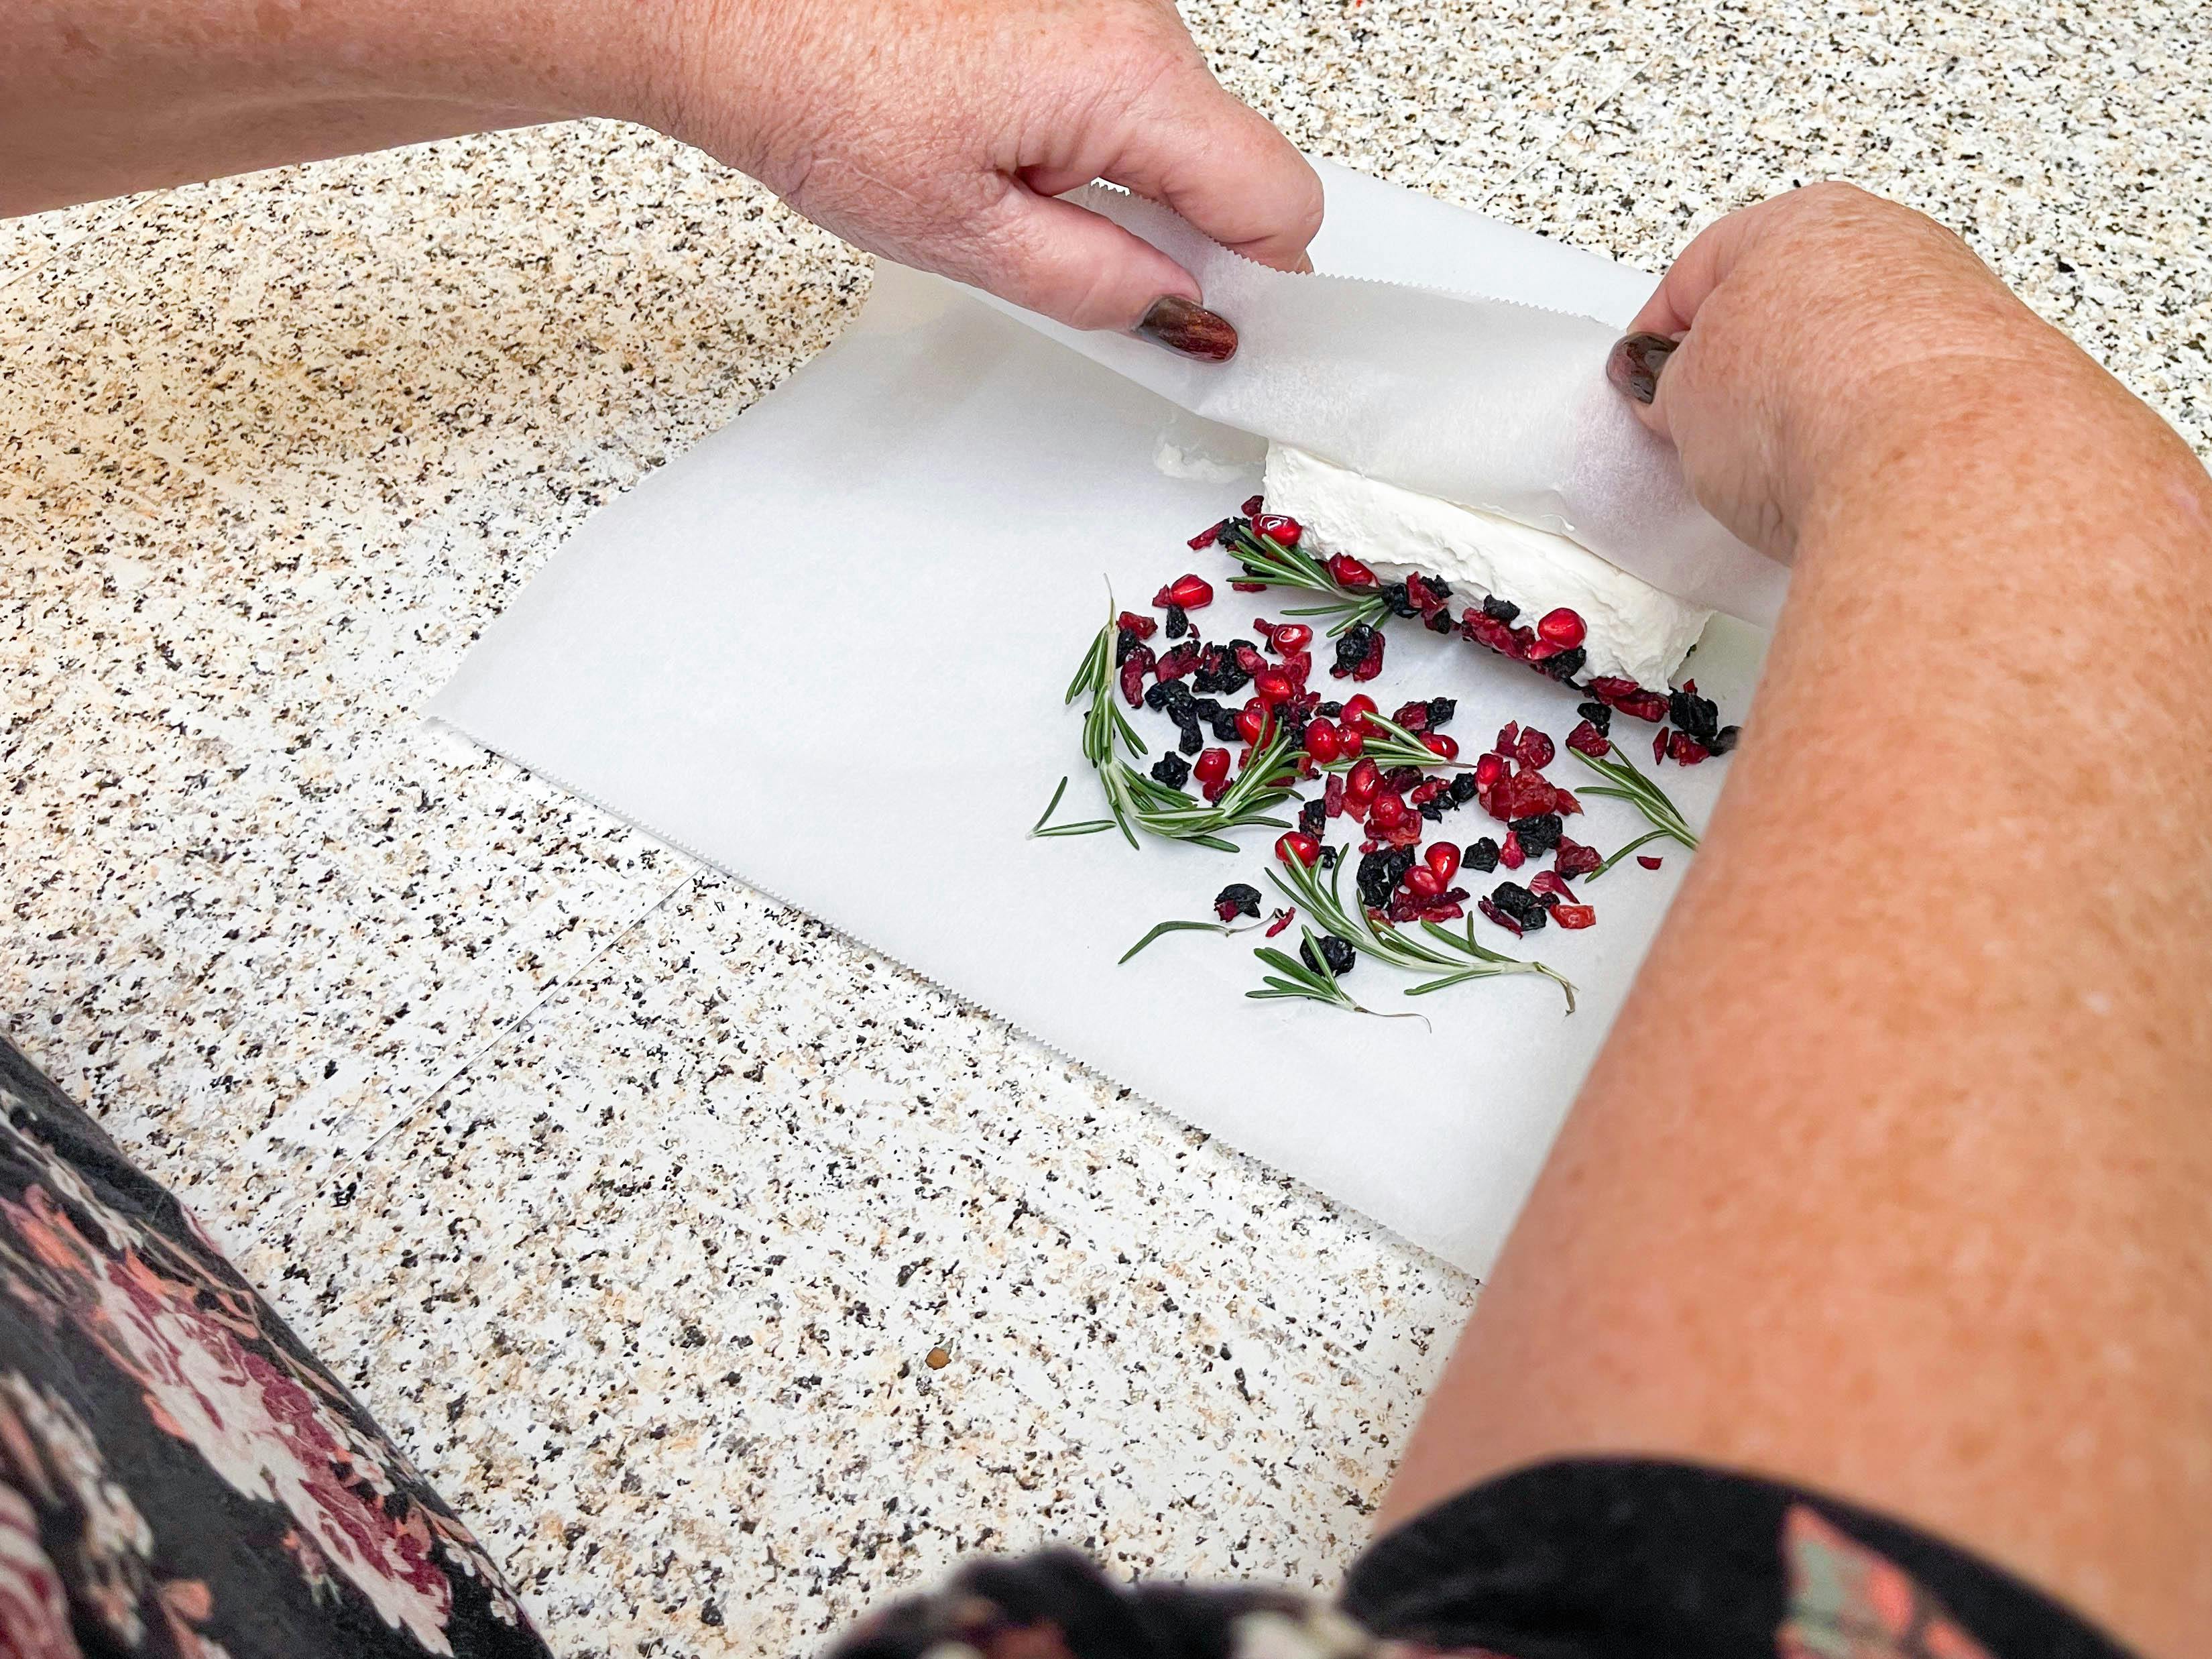 woman rolling goat cheese in rosemary & dried fruits with wax paper 